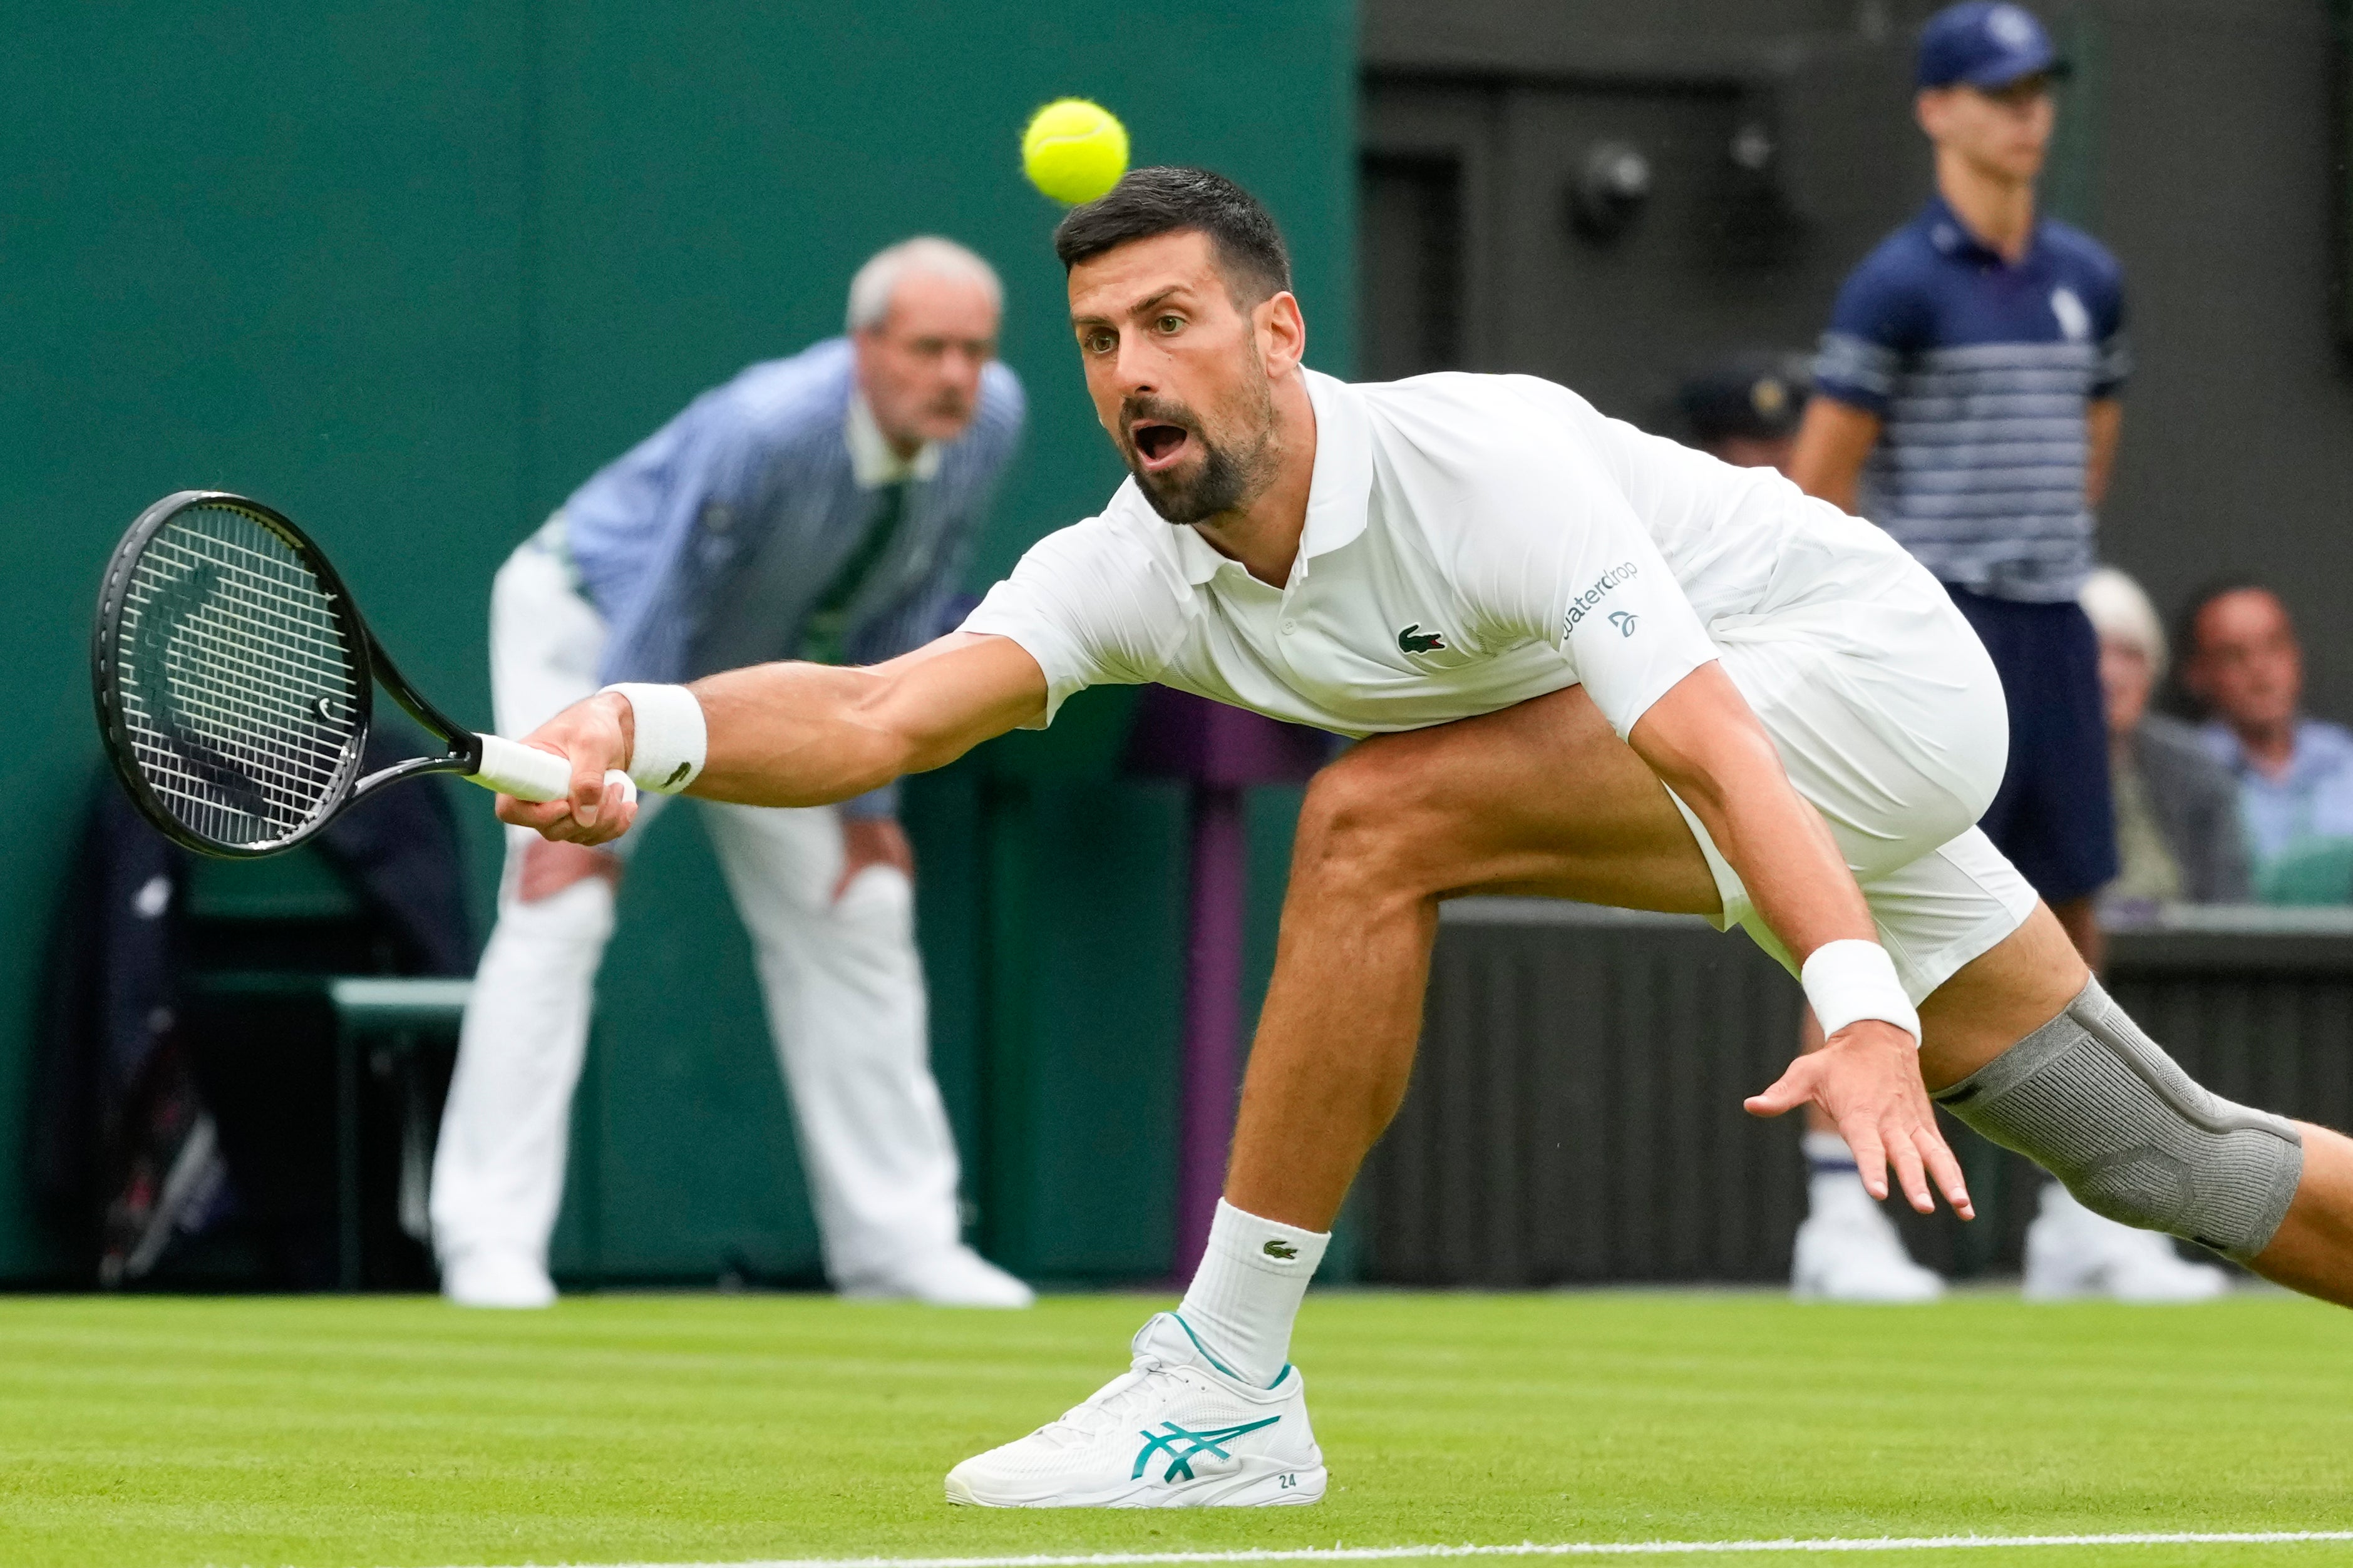 Djokovic showed no ill-effects from his stretches and slides